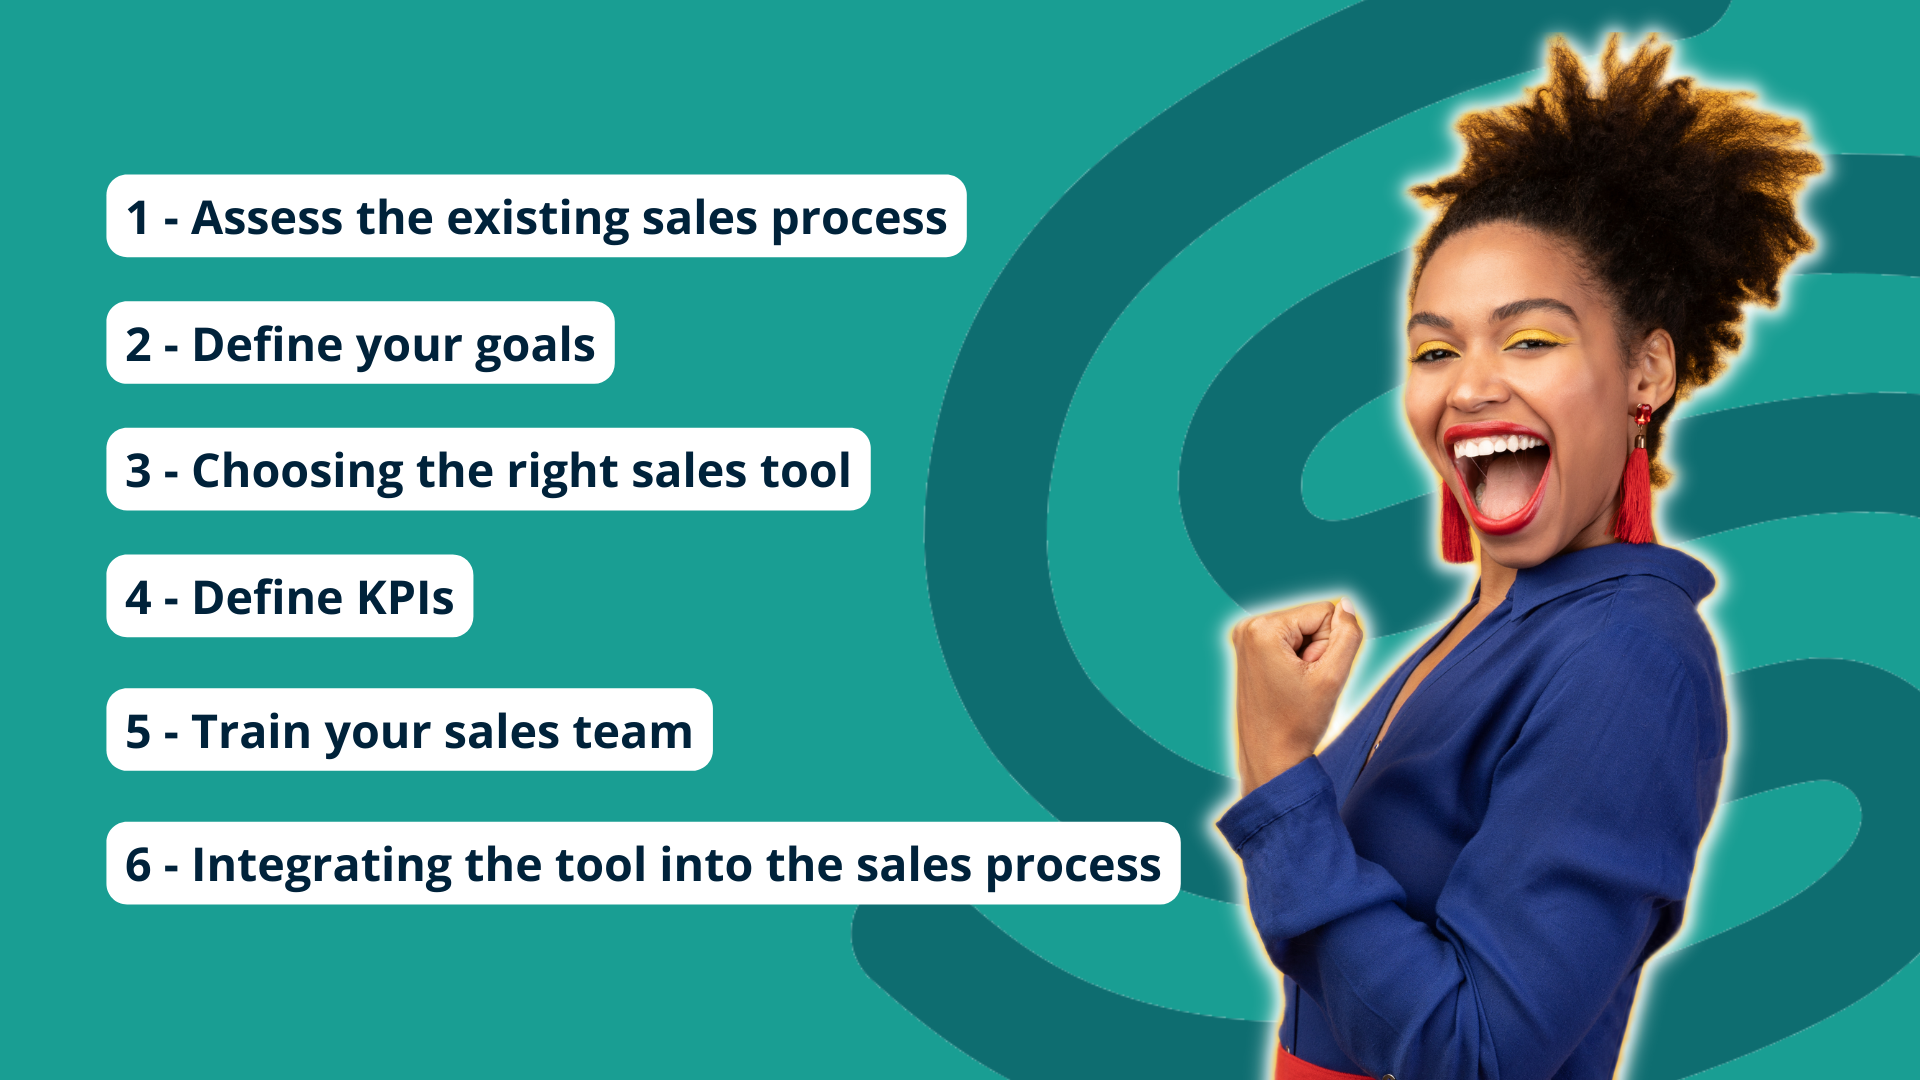 Steps to integrate a sales enablement tool into your existing sales process